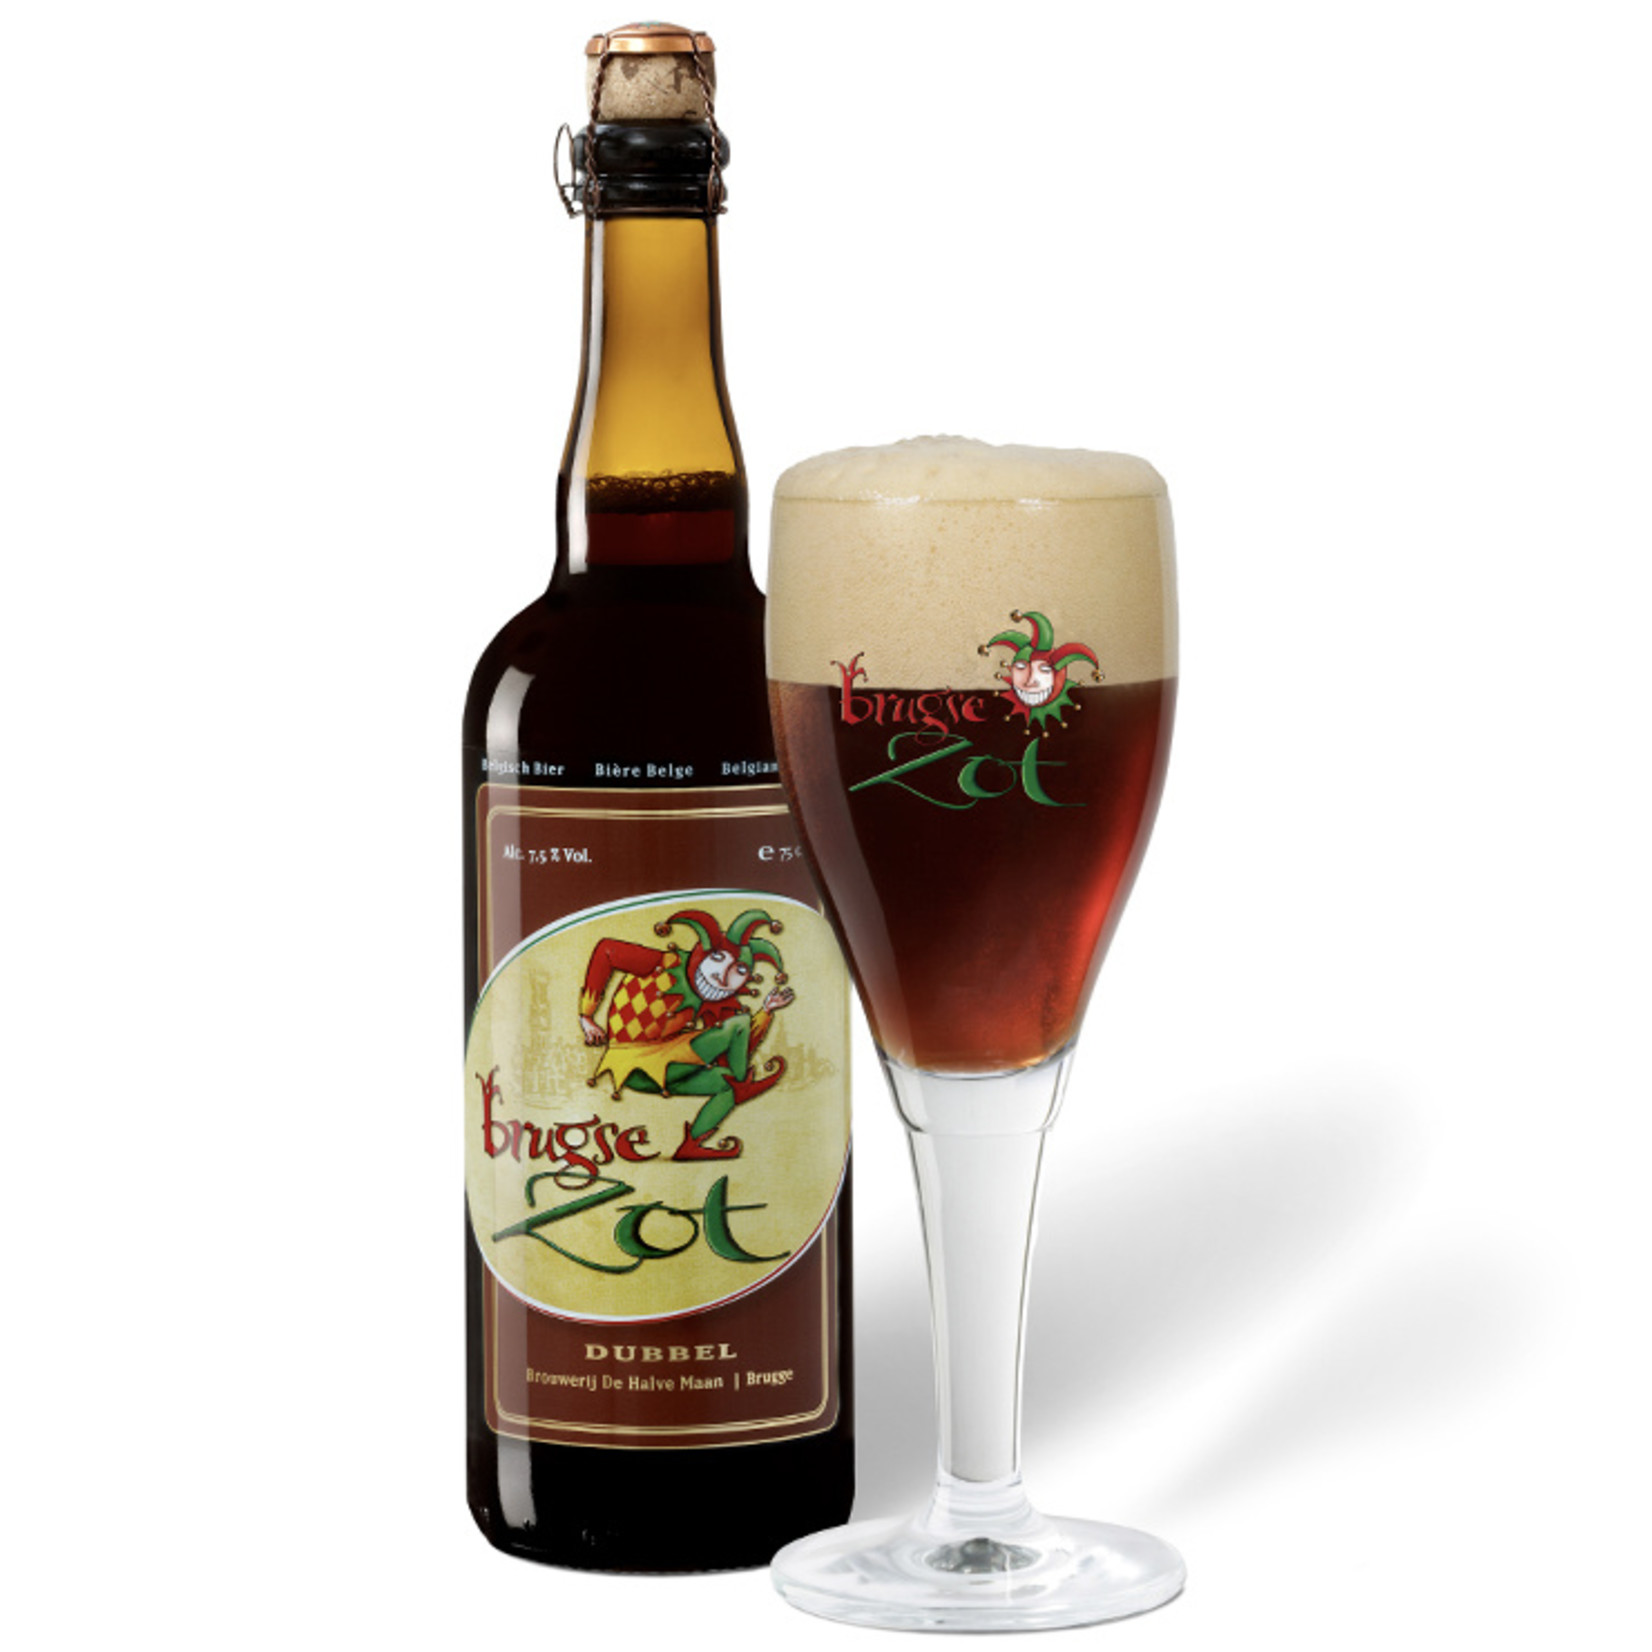 Brugse Zot Dubbel with Glass